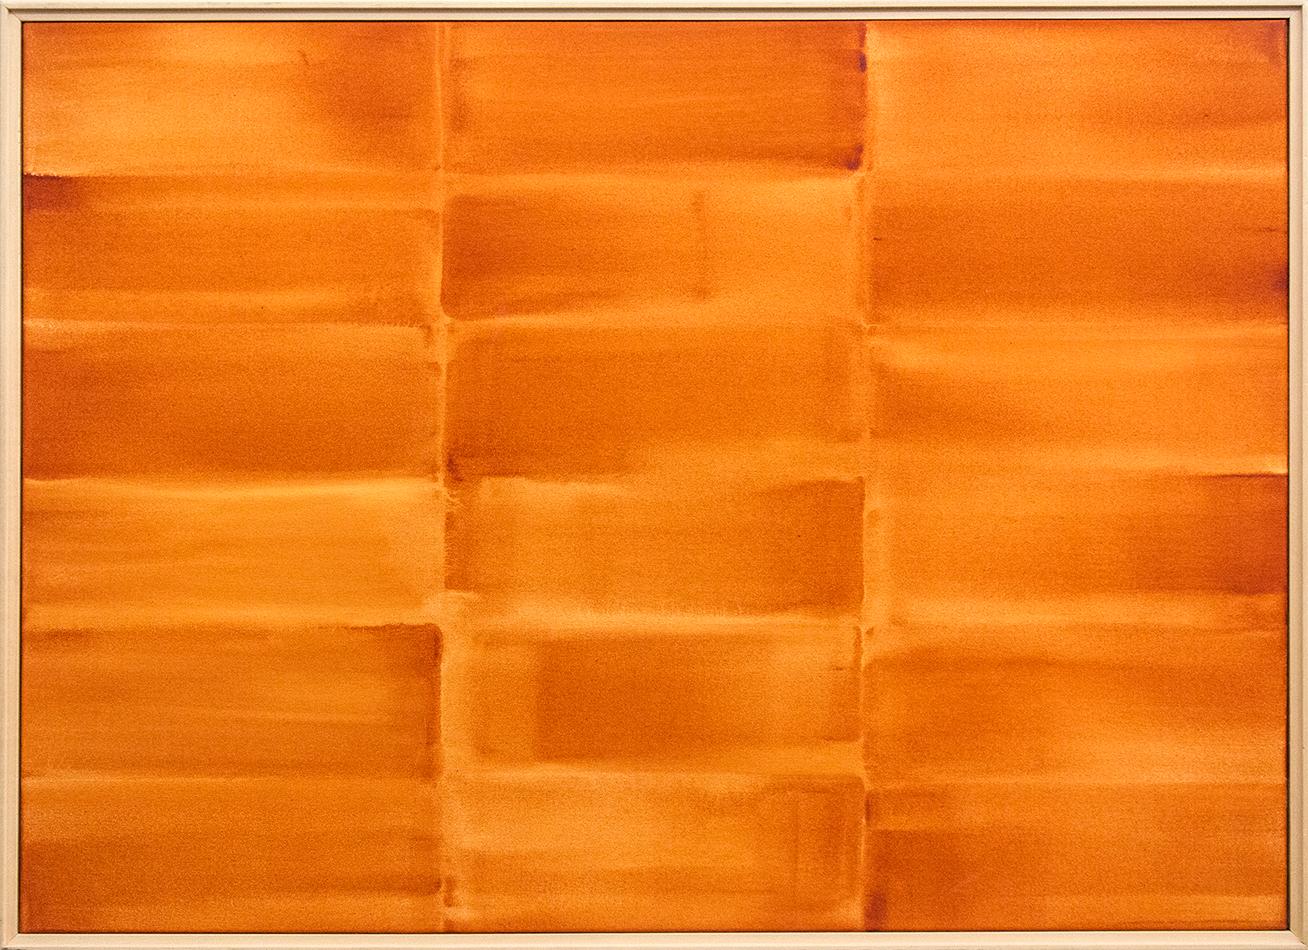 Milly Ristvedt Abstract Painting - Tiger Lily/Gold - orange grid, abstract geometric composition, acrylic on canvas